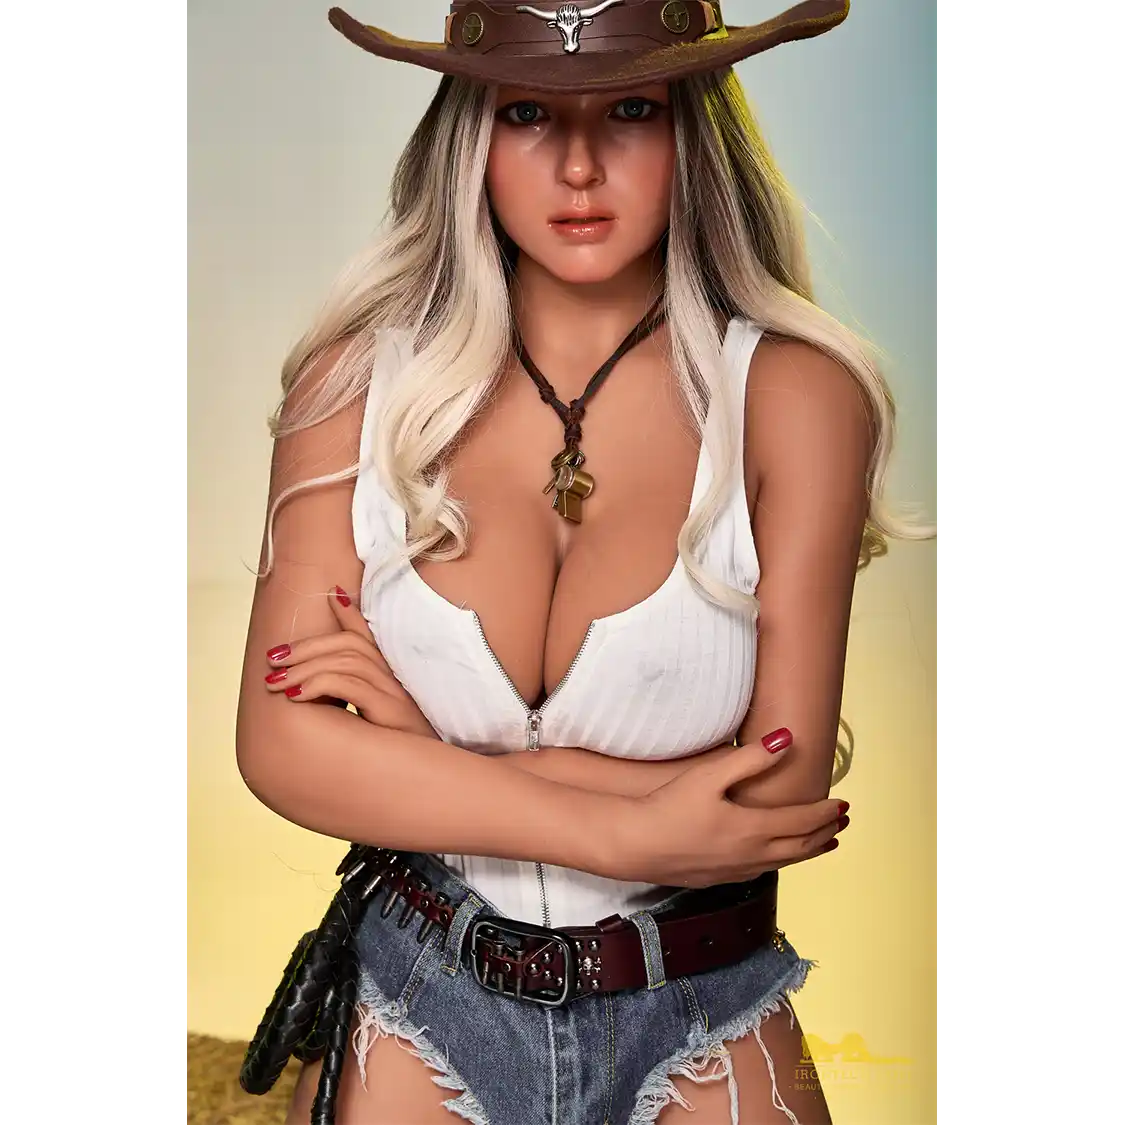 5ft 5in or 164cm curvy hybrid sex doll with long legs, long blonde hair, large breasts and blue eyes in a white tank top and short denim shorts in a cowboy hat.